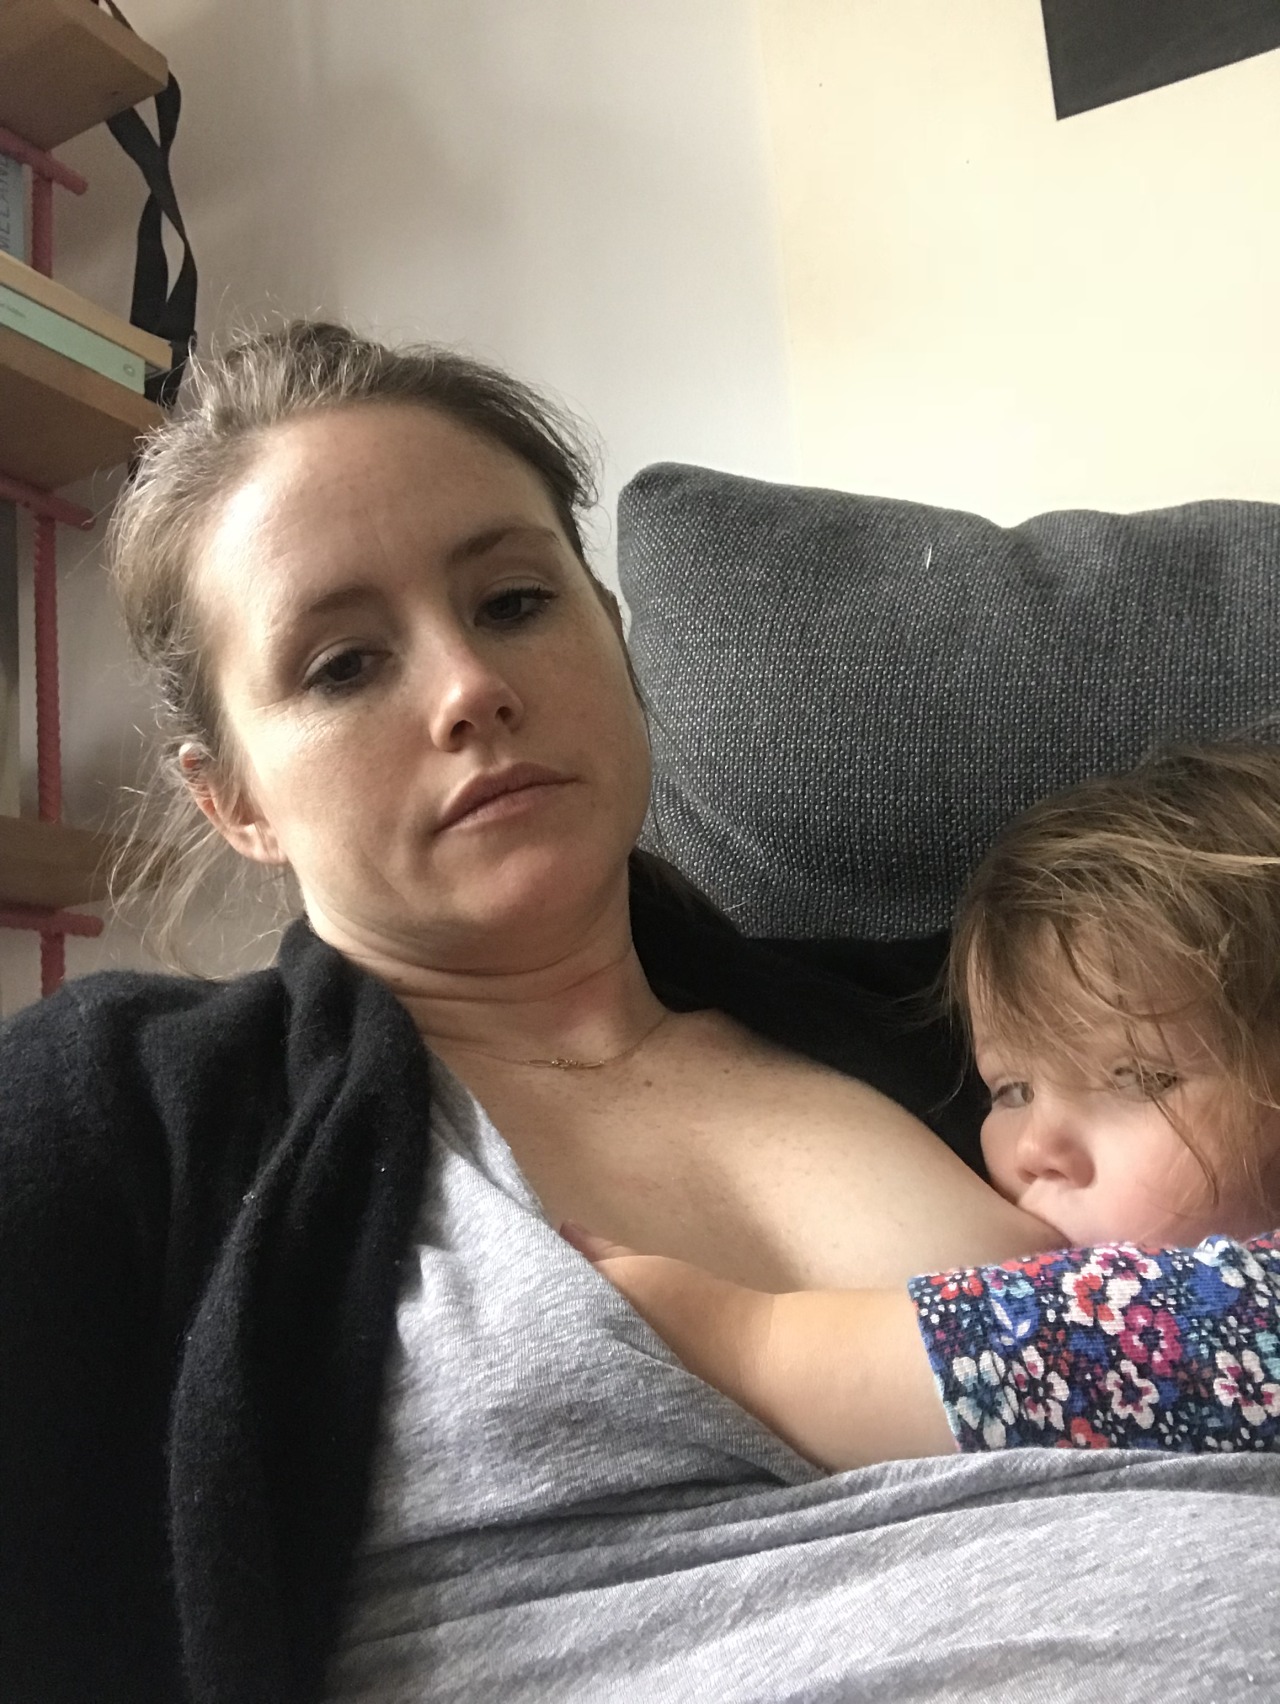 Daughter Fucked While Asleep